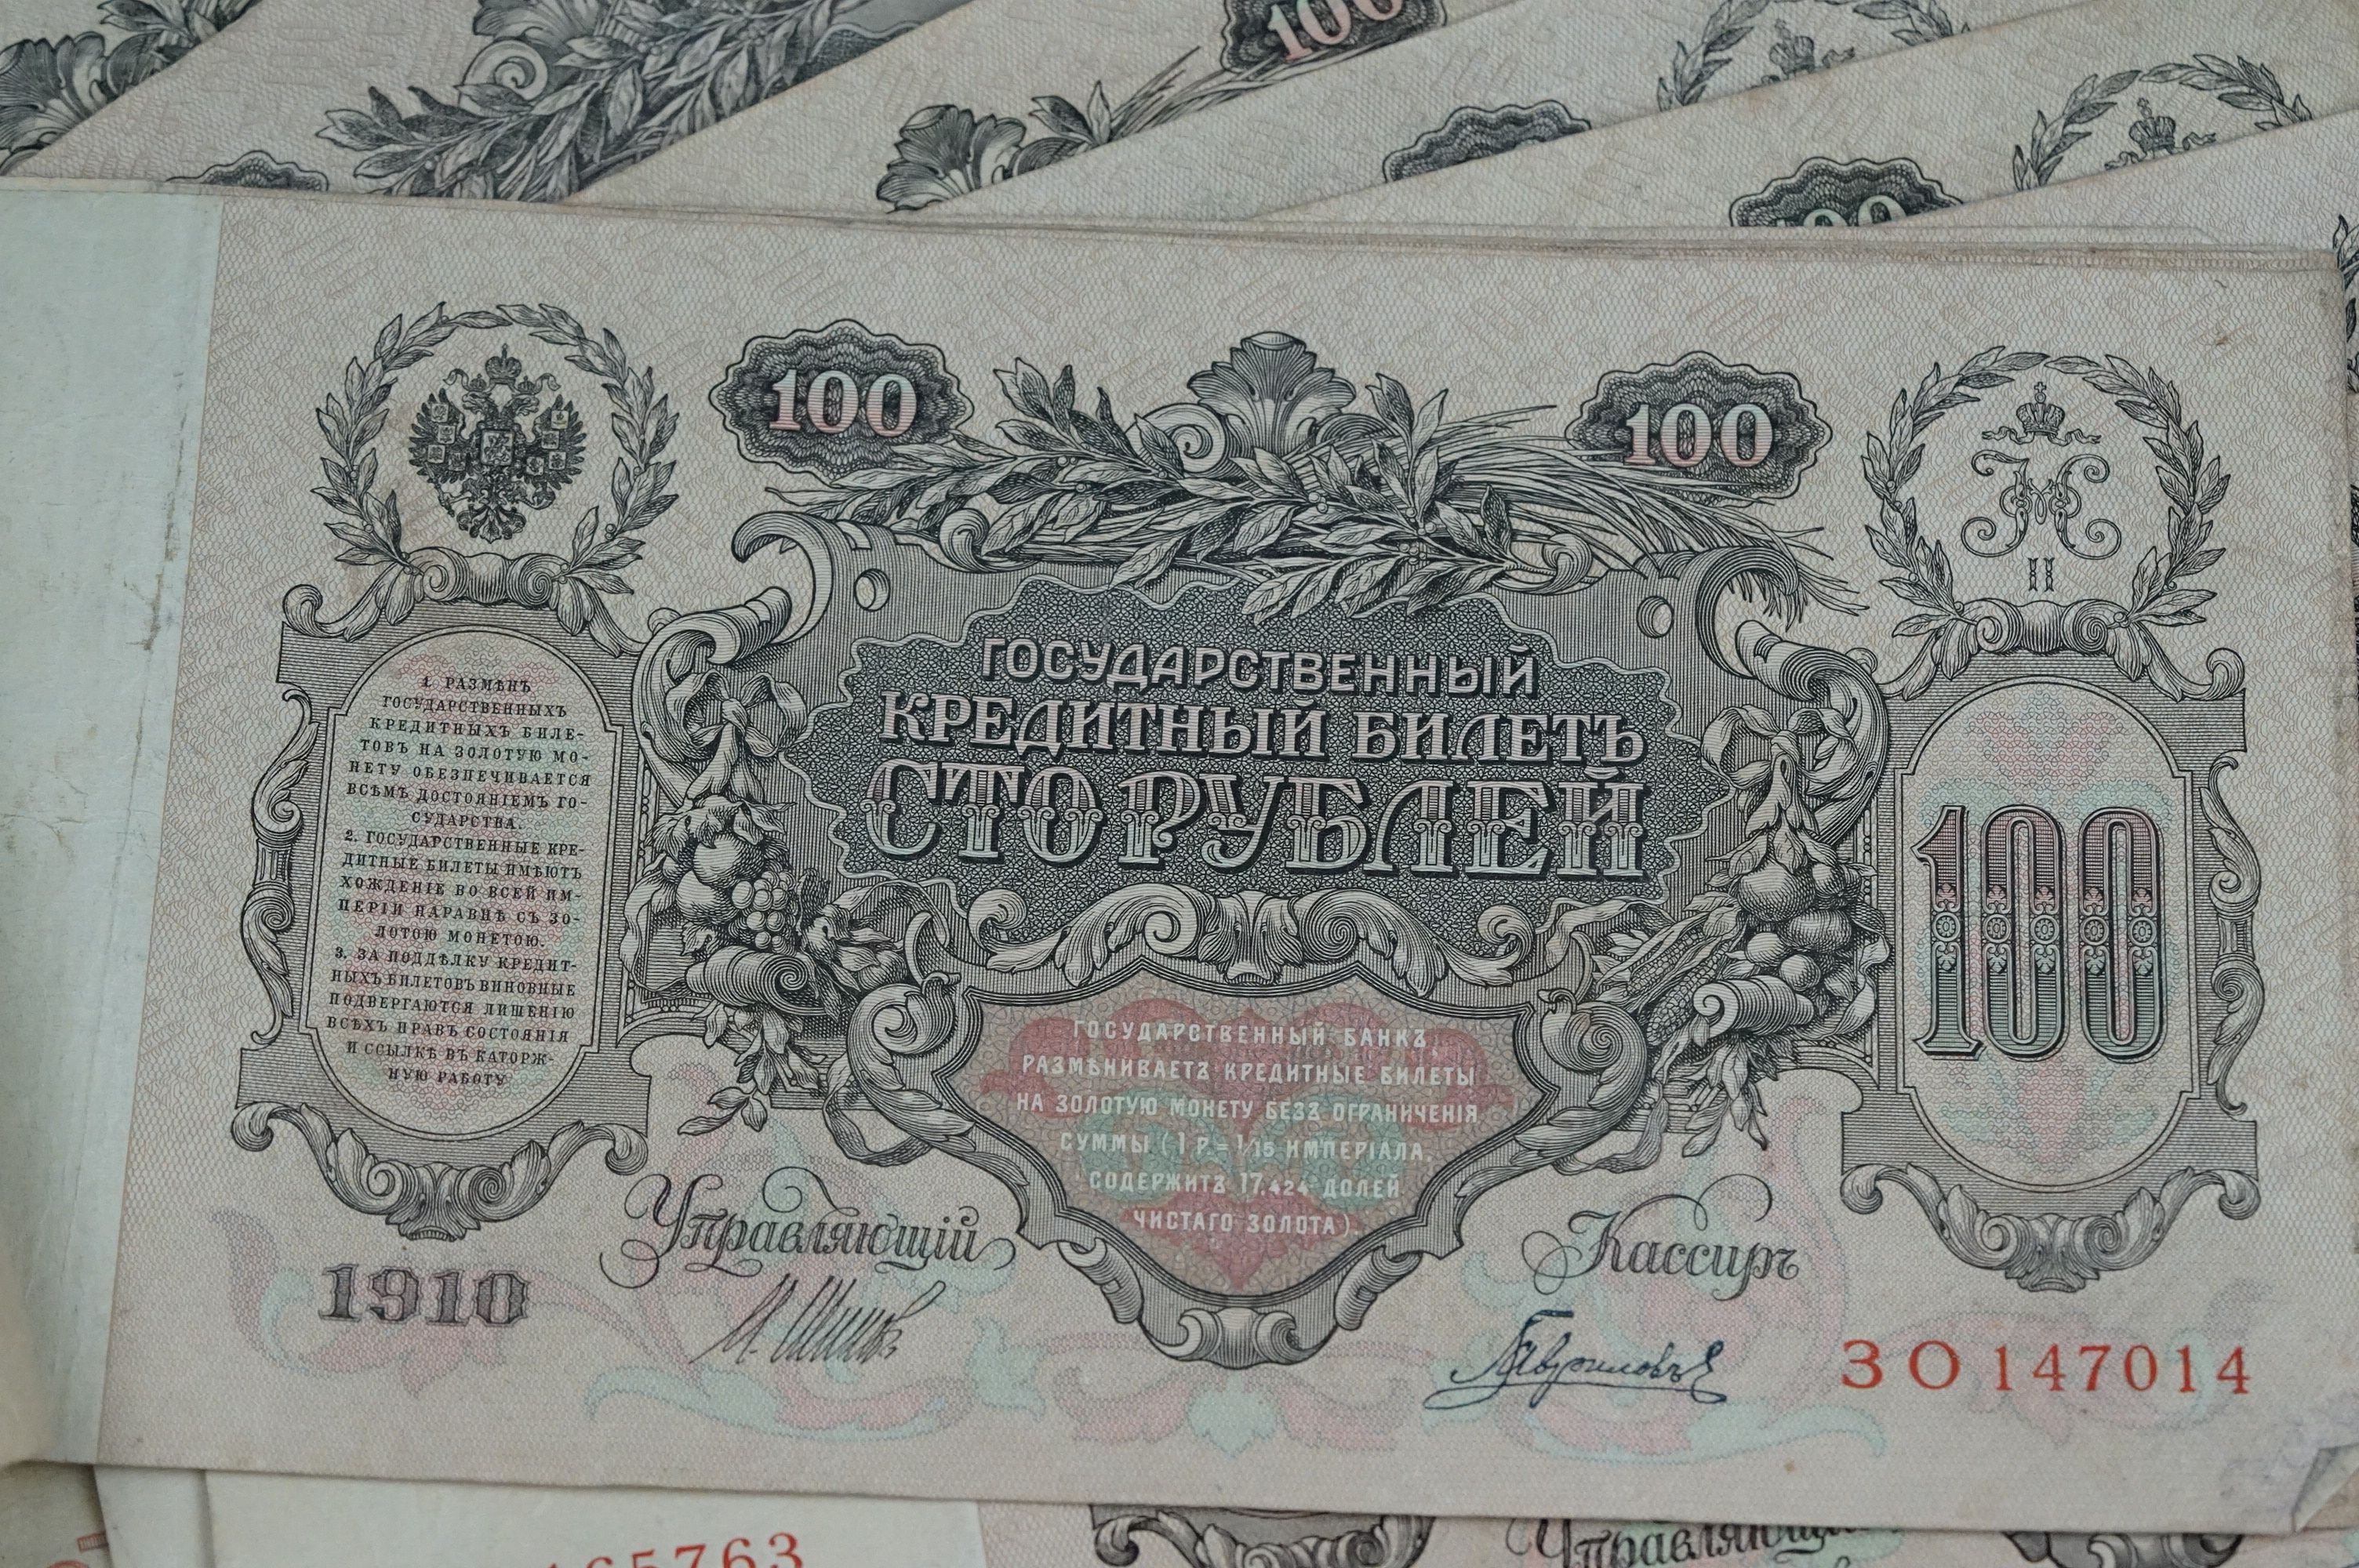 A collection of Russian 100 Rouble banknotes dated 1910. - Image 6 of 6